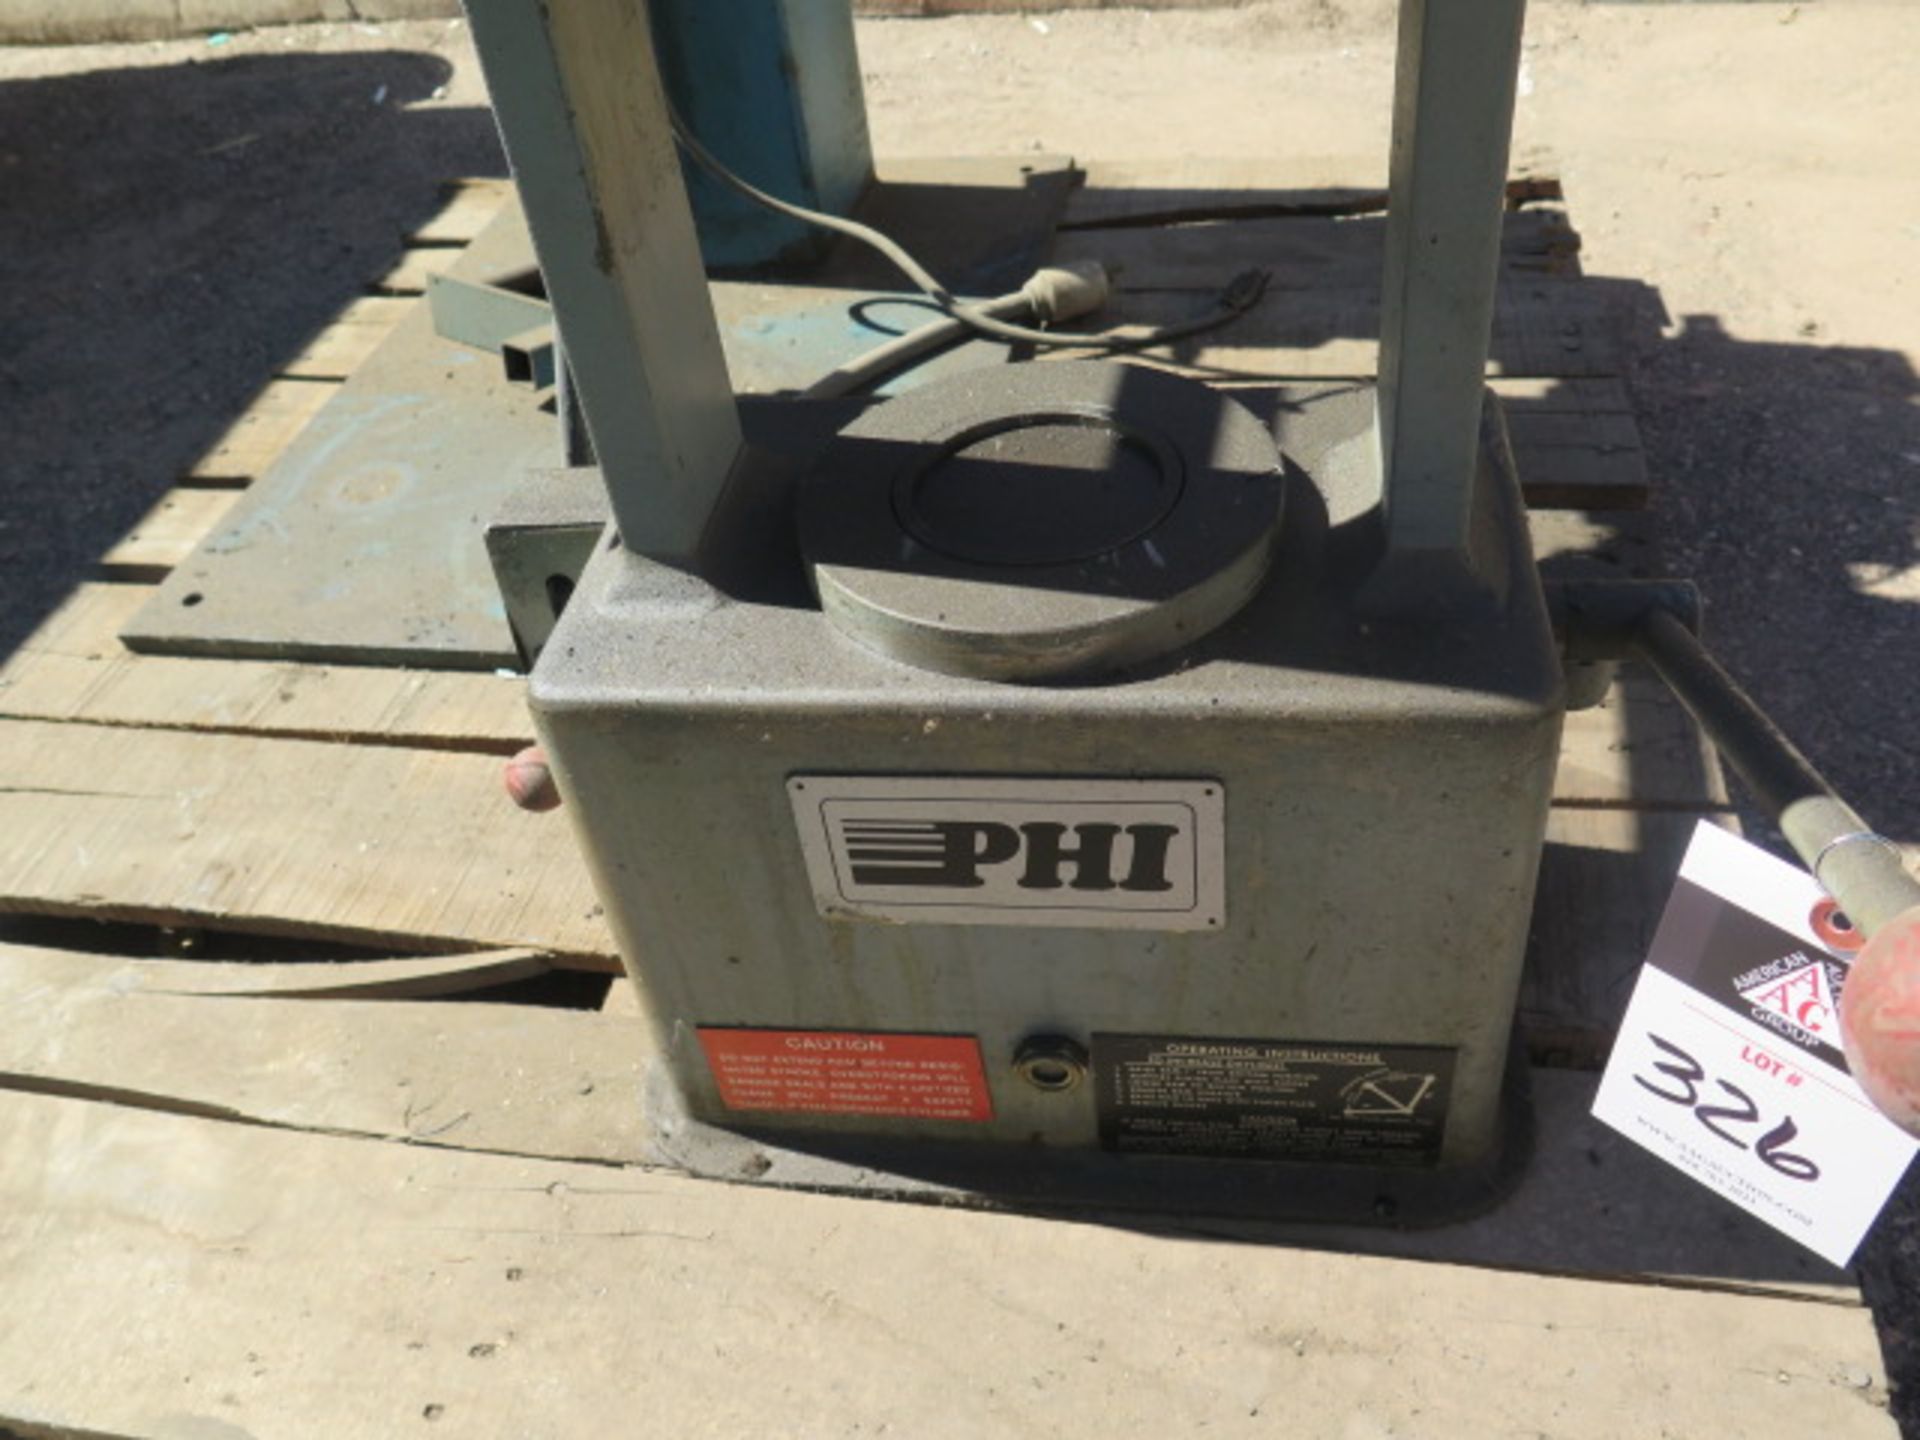 PHI mdl. 215H 4000 PSI Hydraulic Test Stand s/n 88-1-002 (SOLD AS-IS - NO WARRANTY) - Image 2 of 8